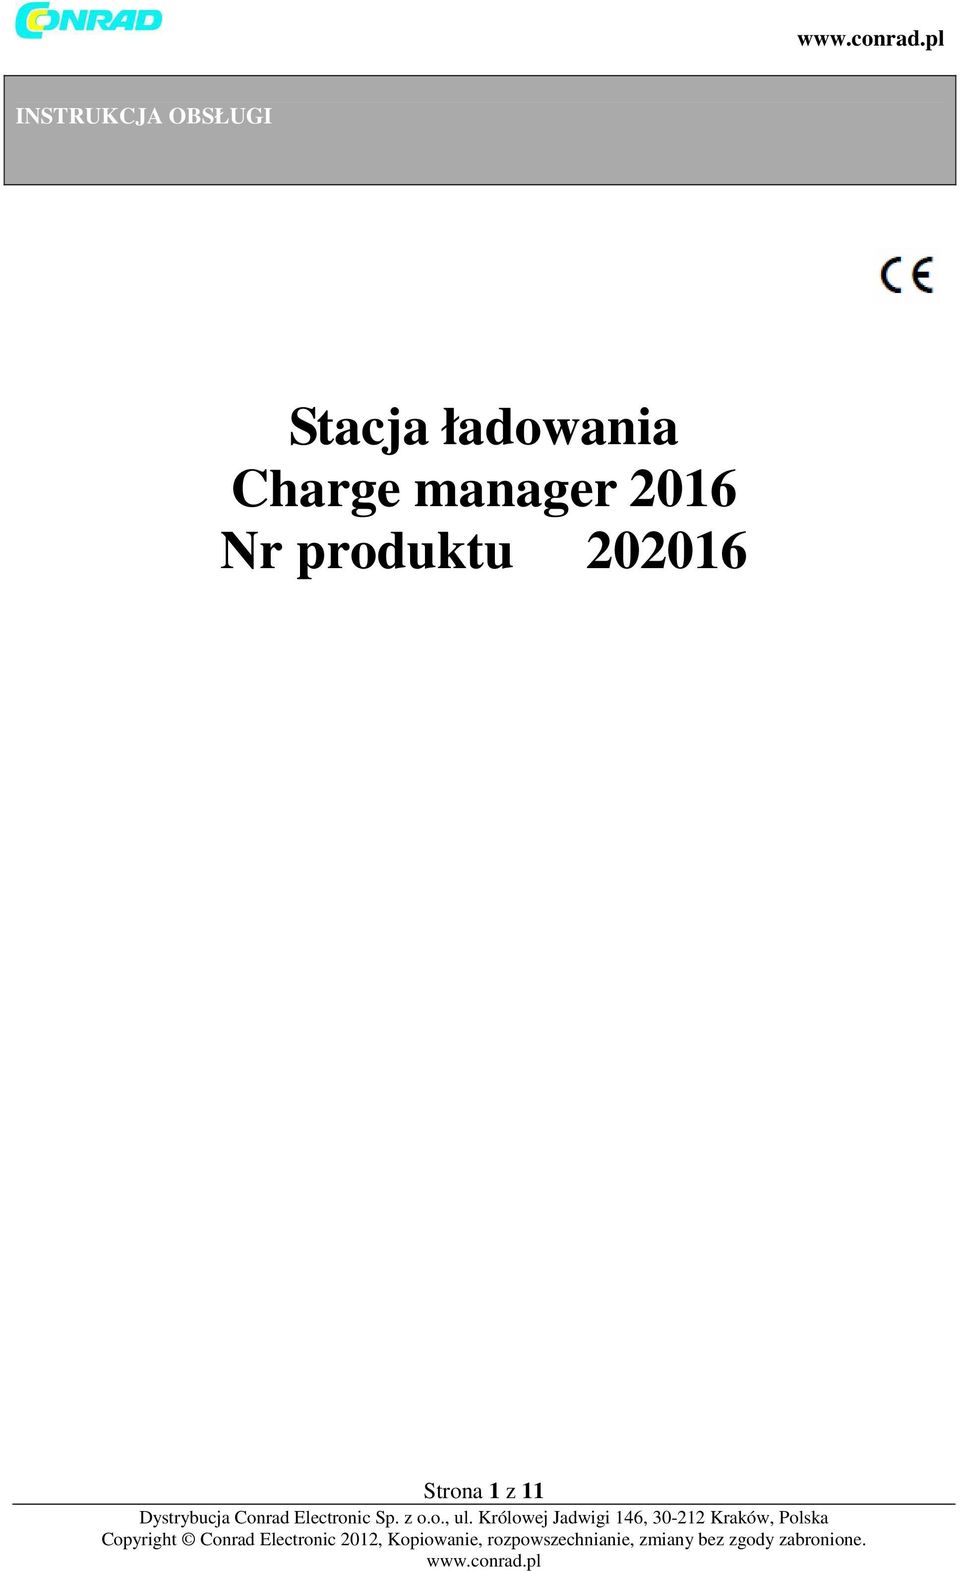 Charge manager 2016